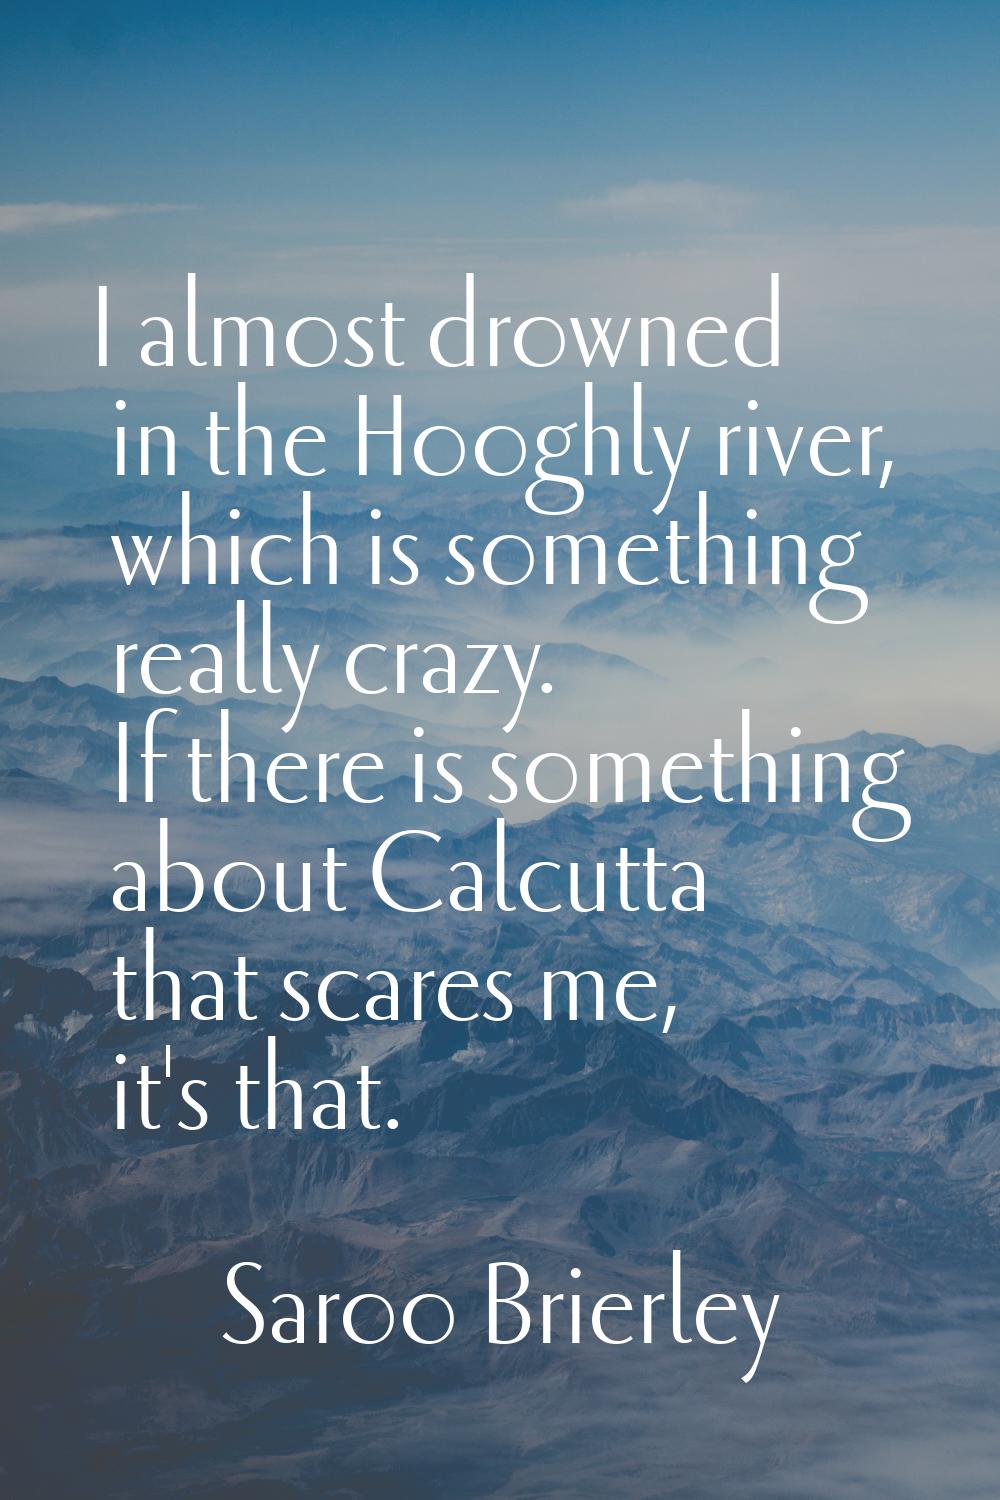 I almost drowned in the Hooghly river, which is something really crazy. If there is something about